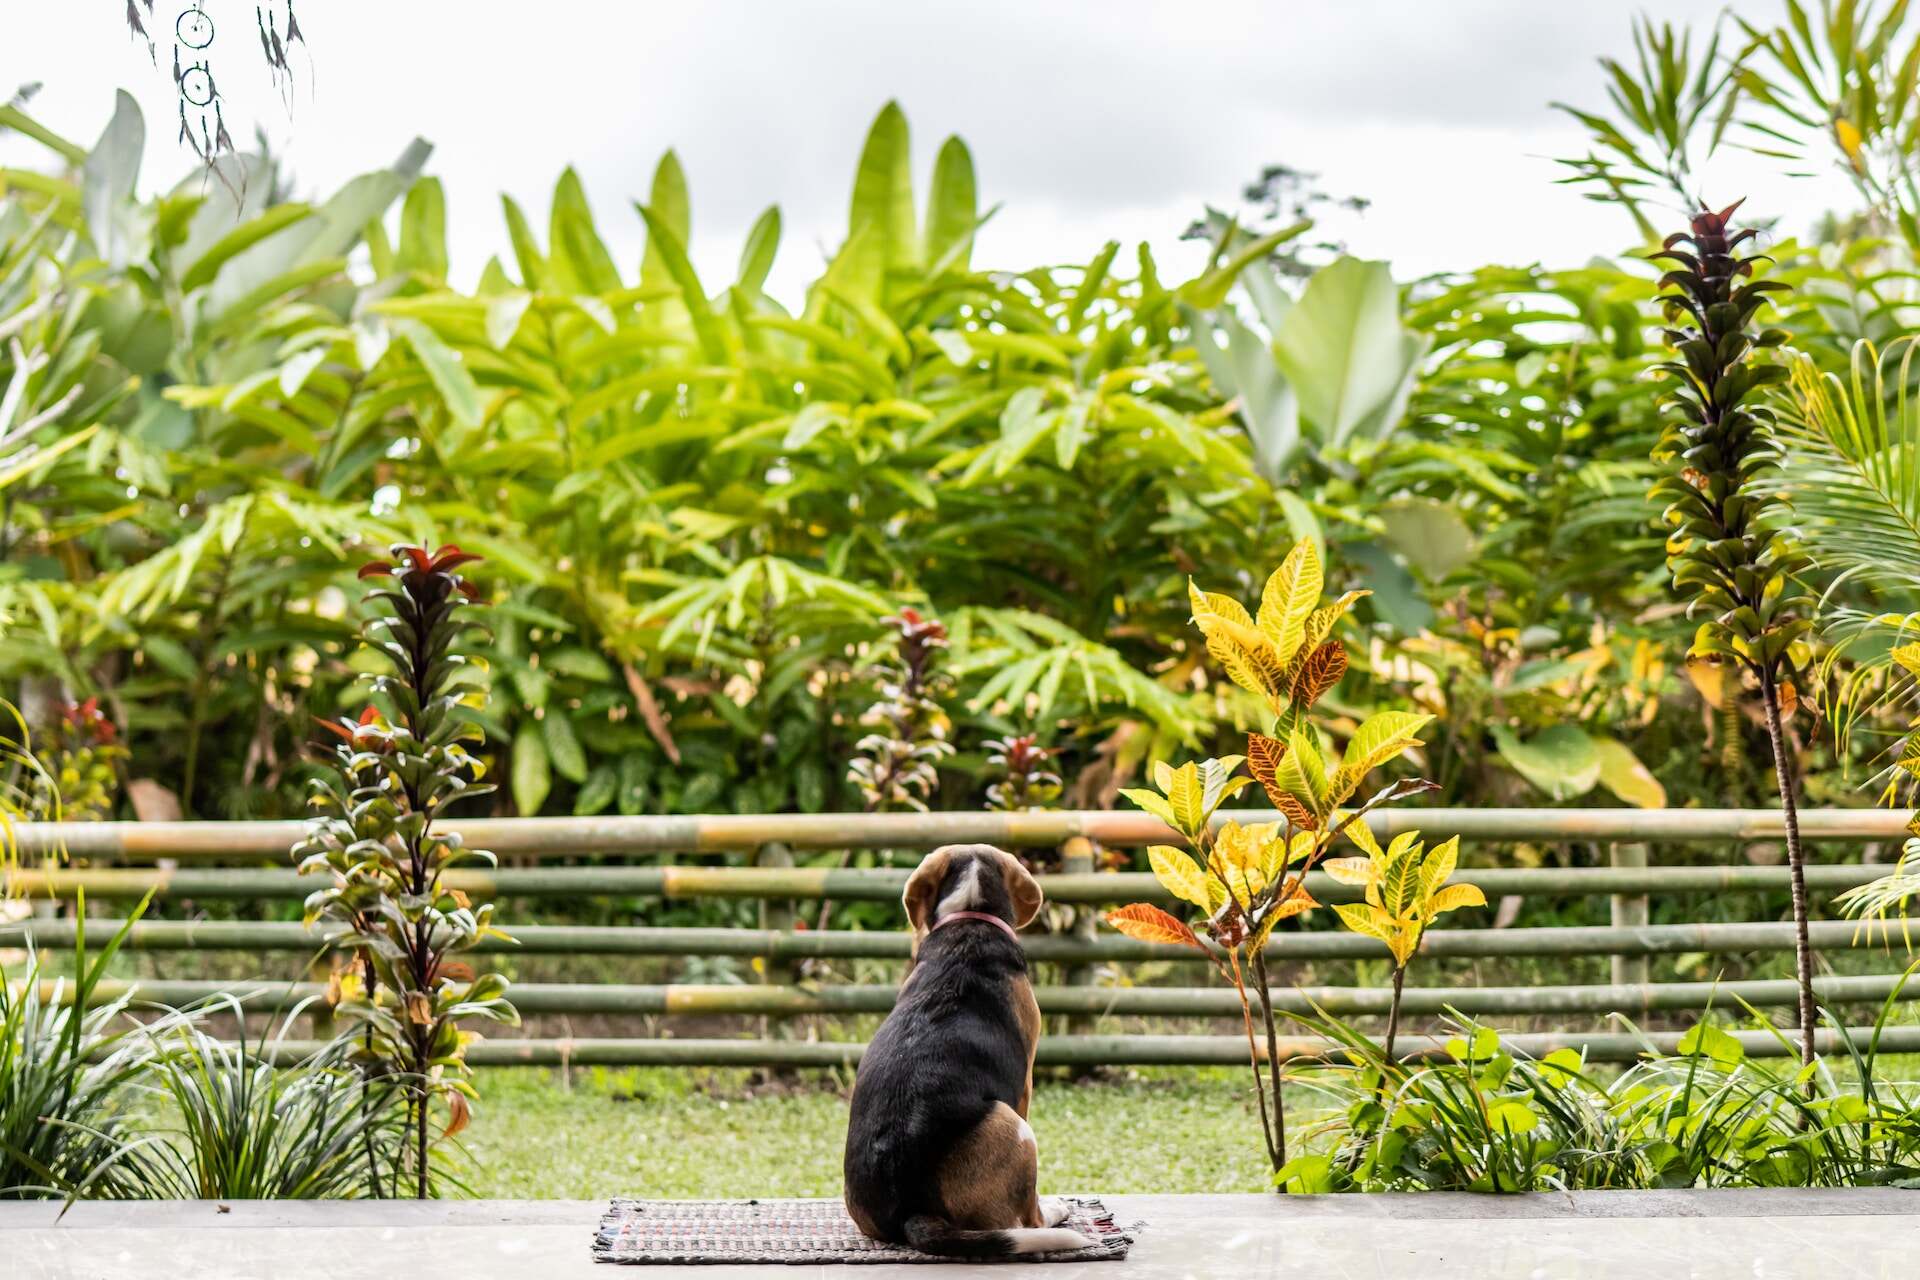 A dog sitting on a porch overlooking a garden of tropical plants